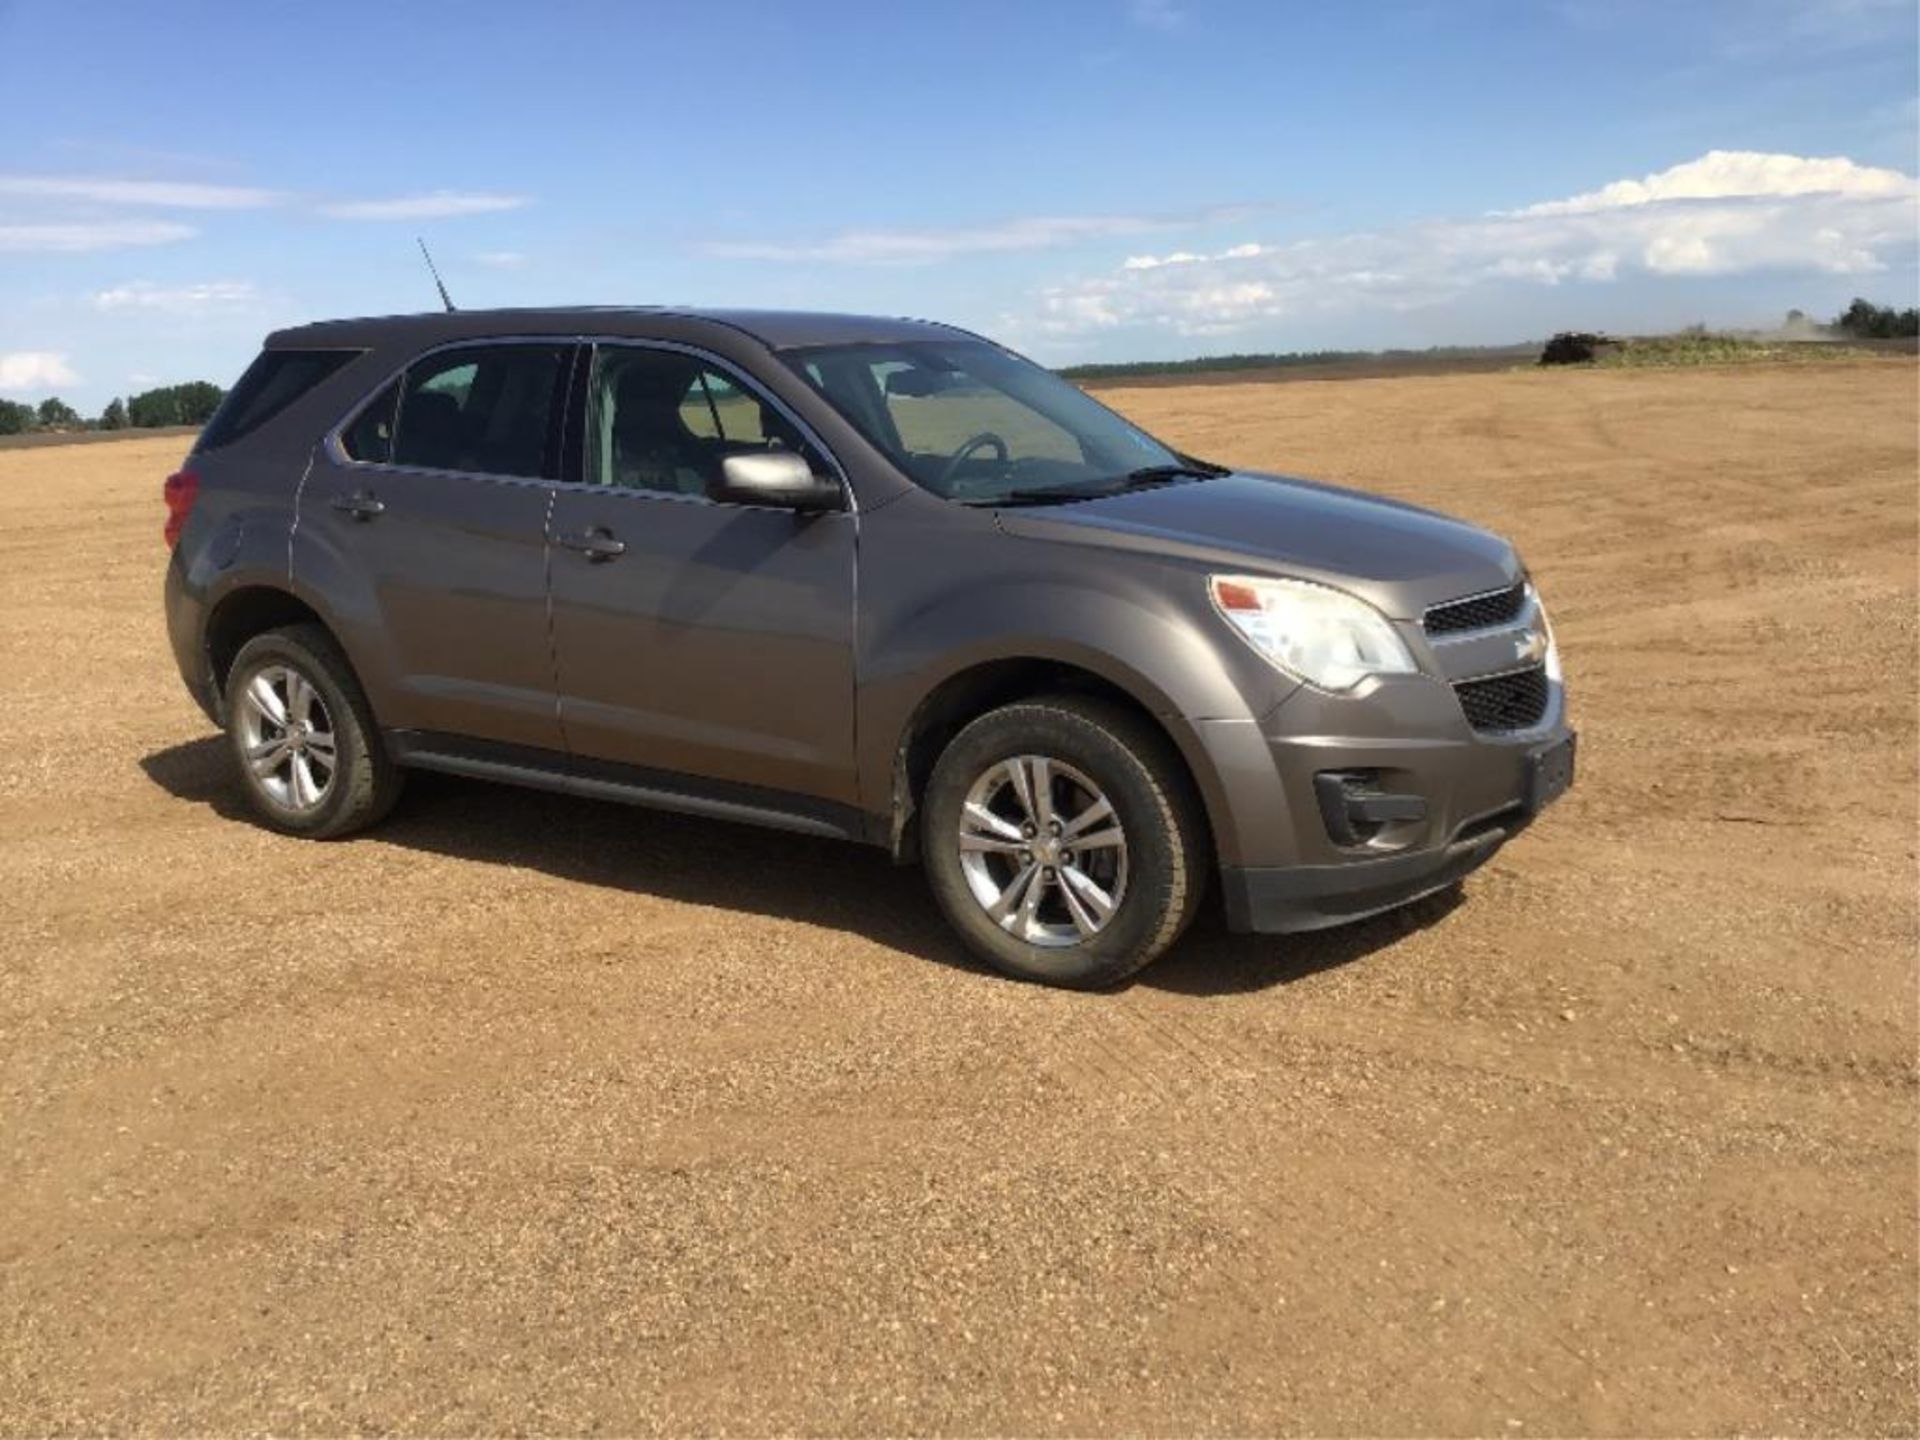 2010 Chevrolet Equinox LS AWD SUV VIN 2CNFLCEW3A6390547 EcoTec Eng, A/T, 105,936km. From the Fort